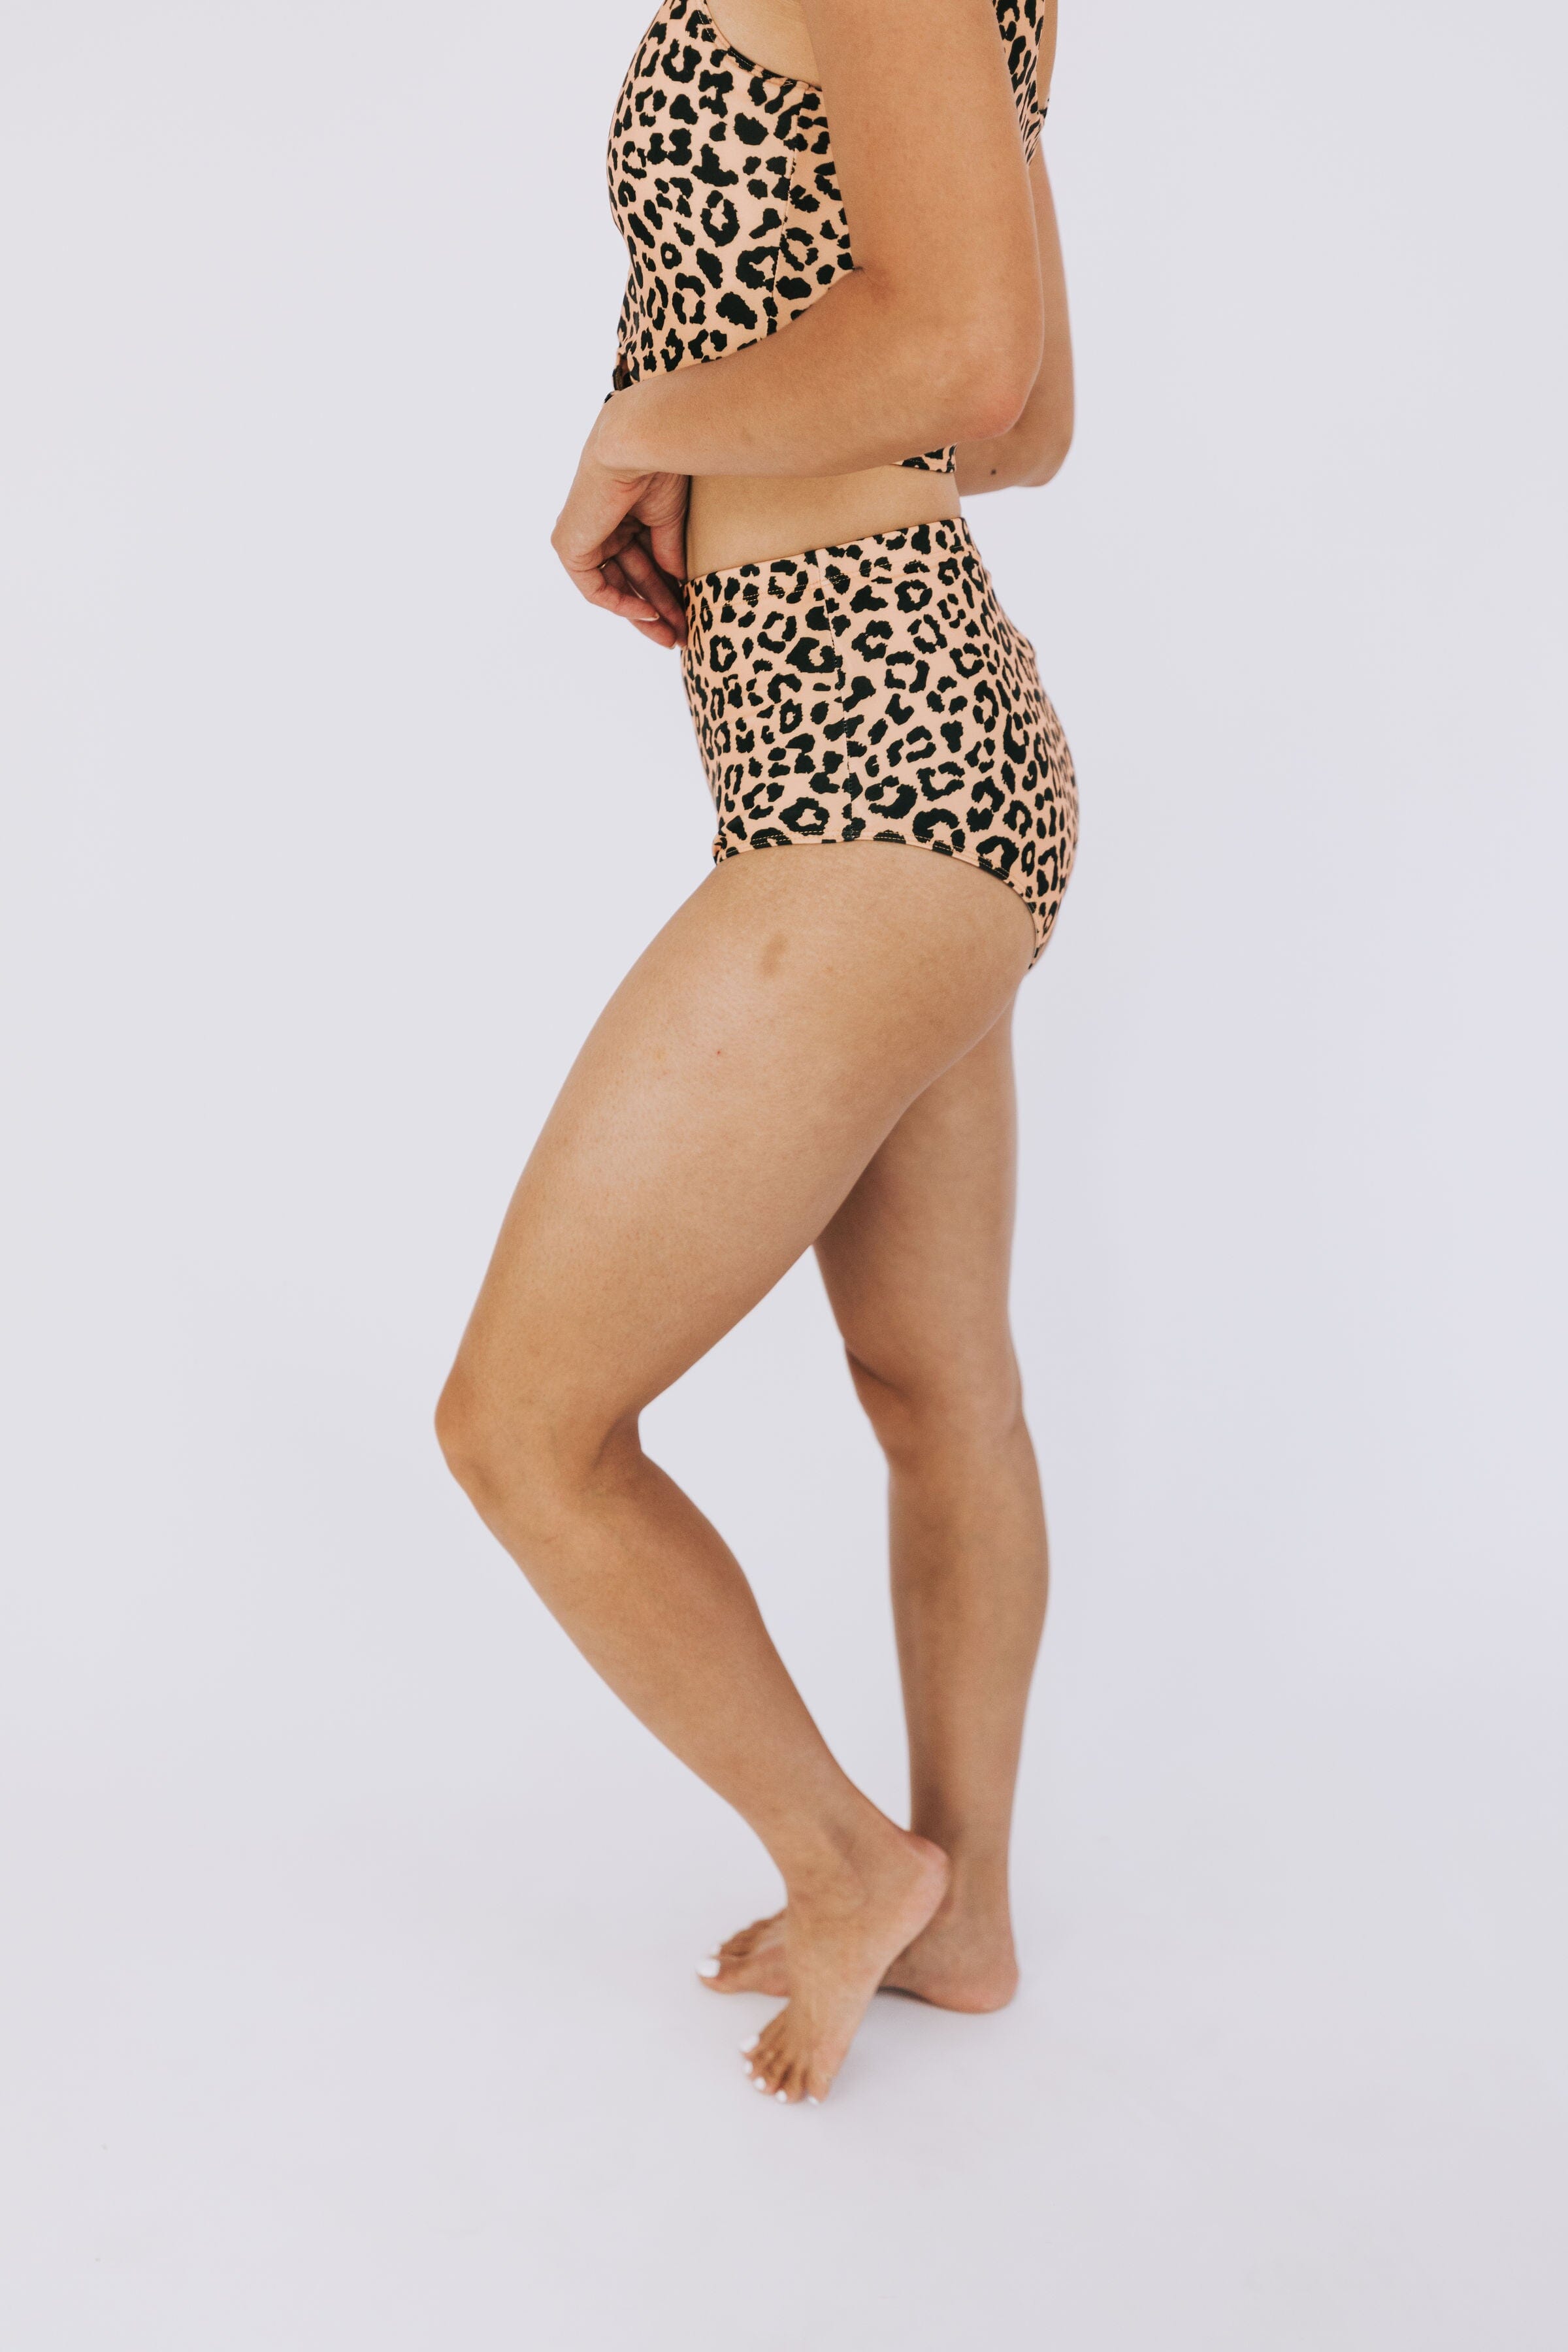 ONE LOVED BABE - Copa Cabana Bottoms - 4 Colors